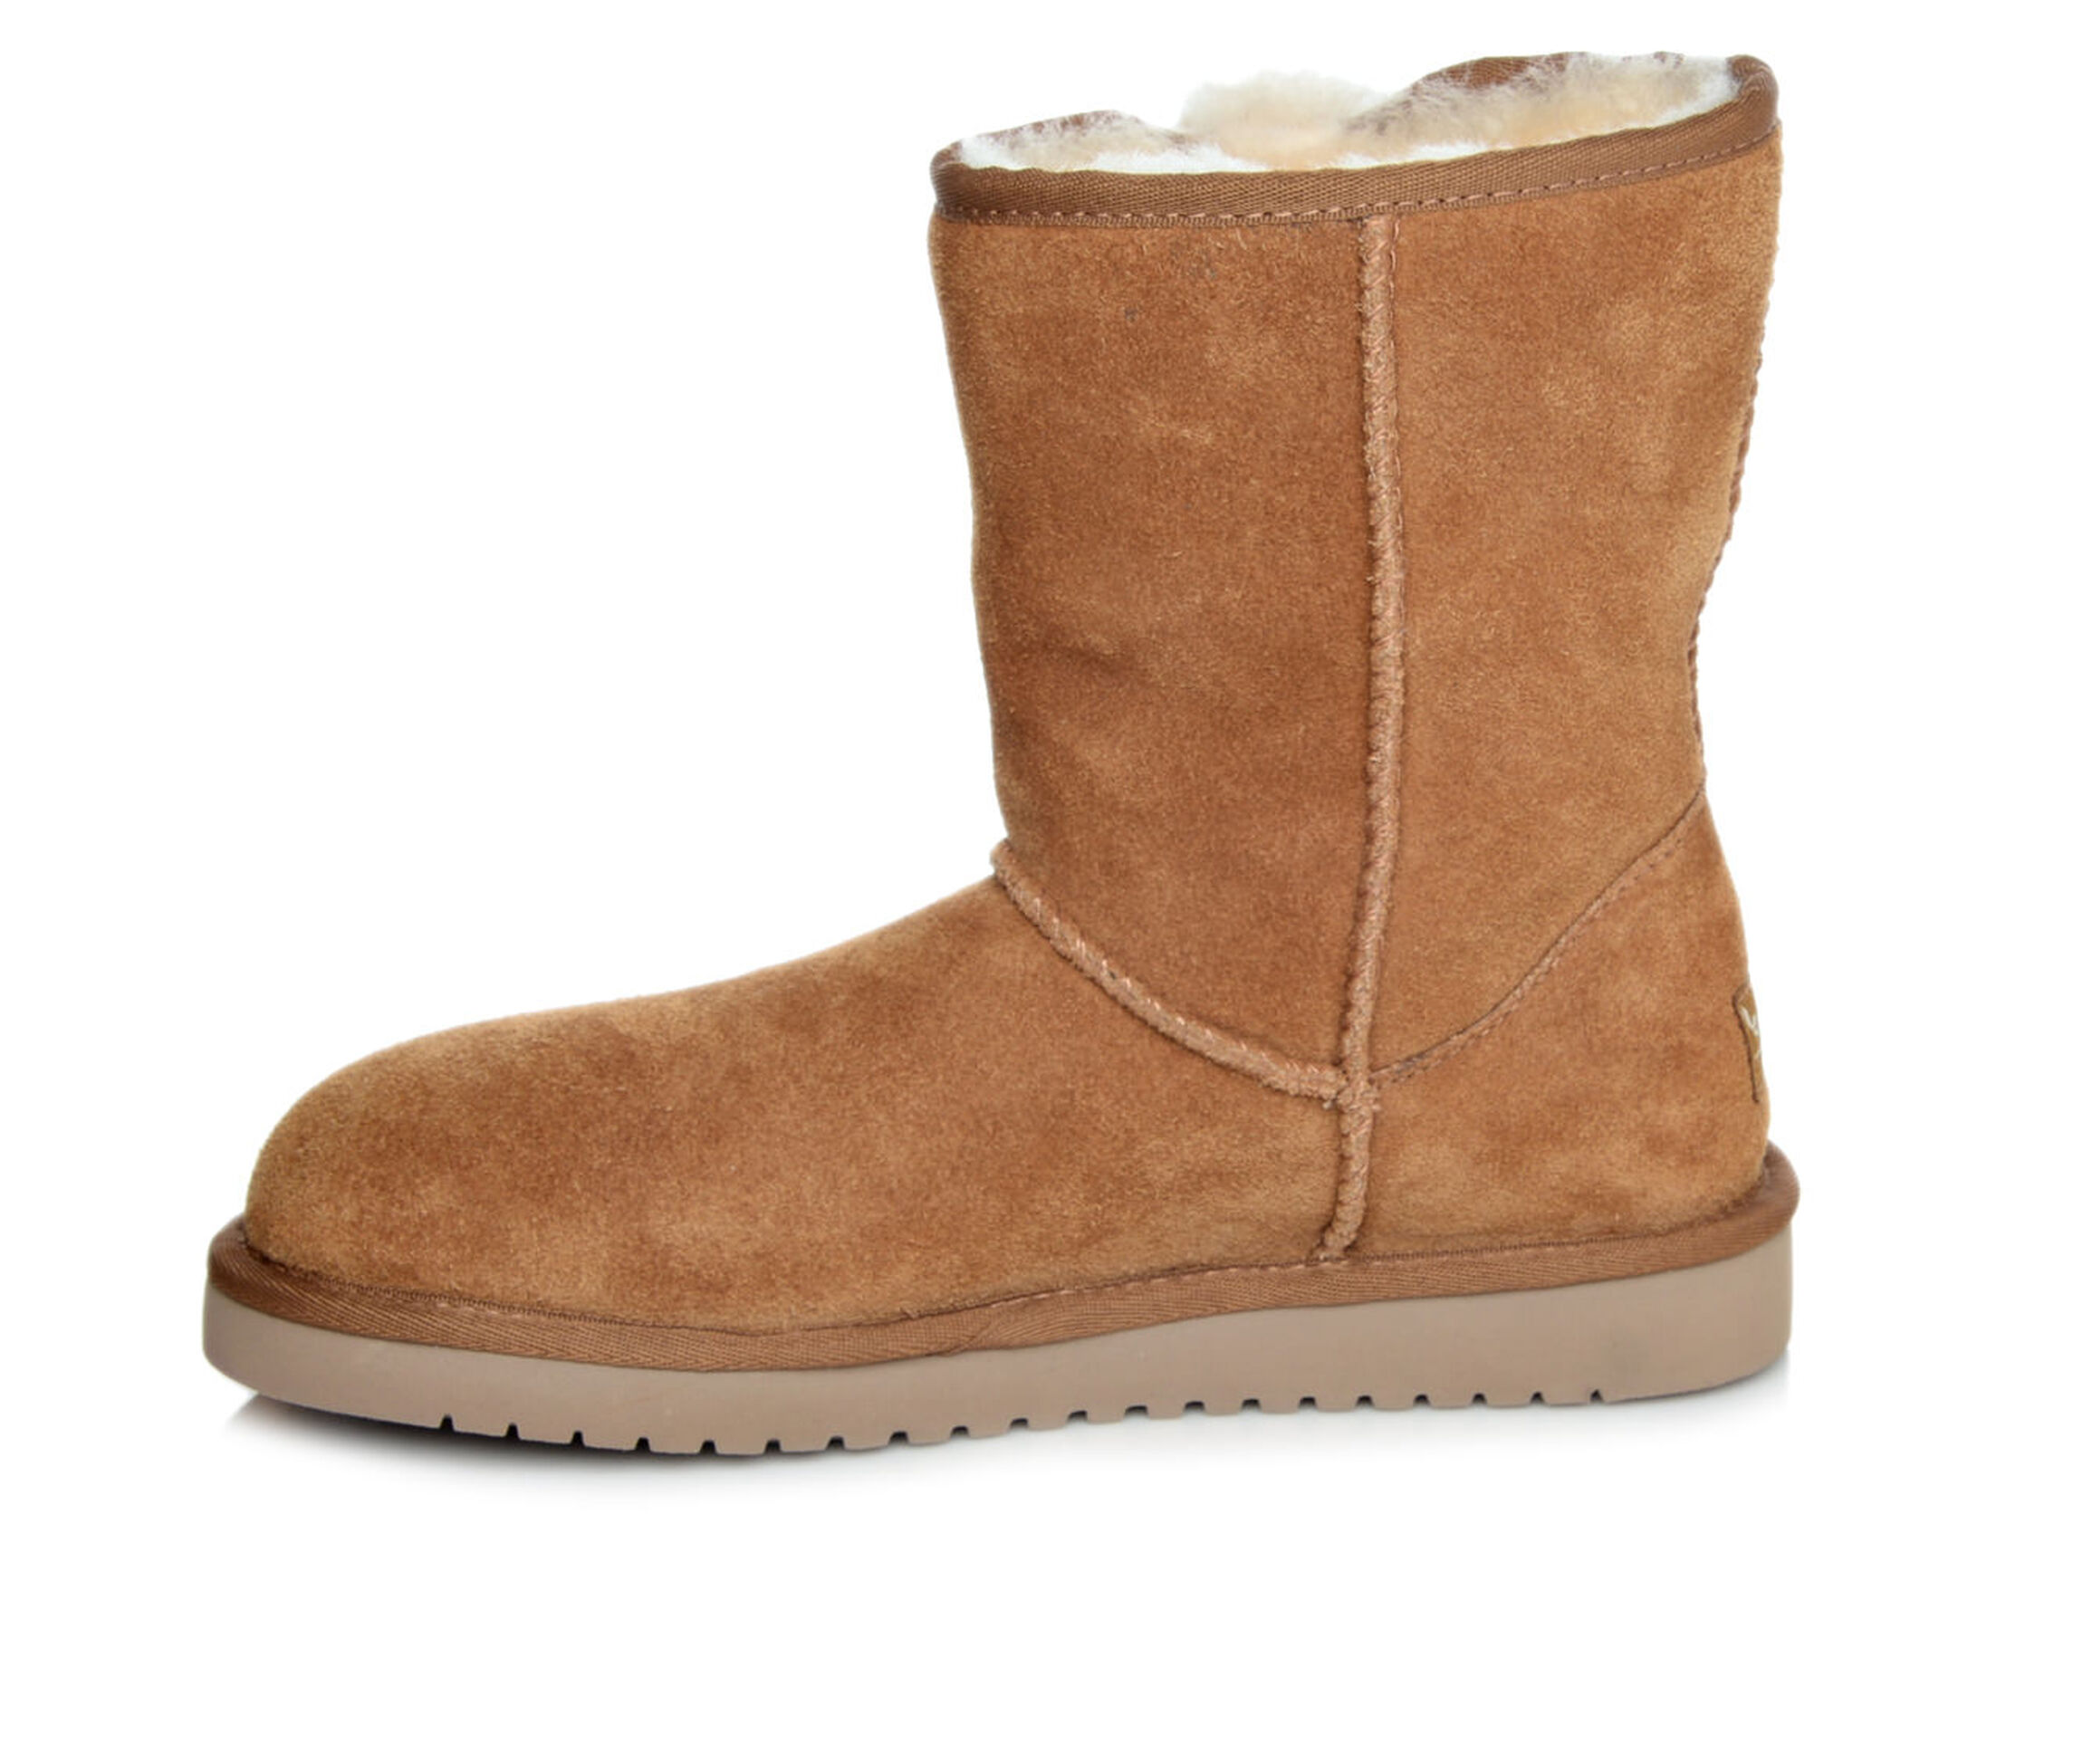 Women's Koolaburra by UGG Shoes and Boots | Shoe Carnival